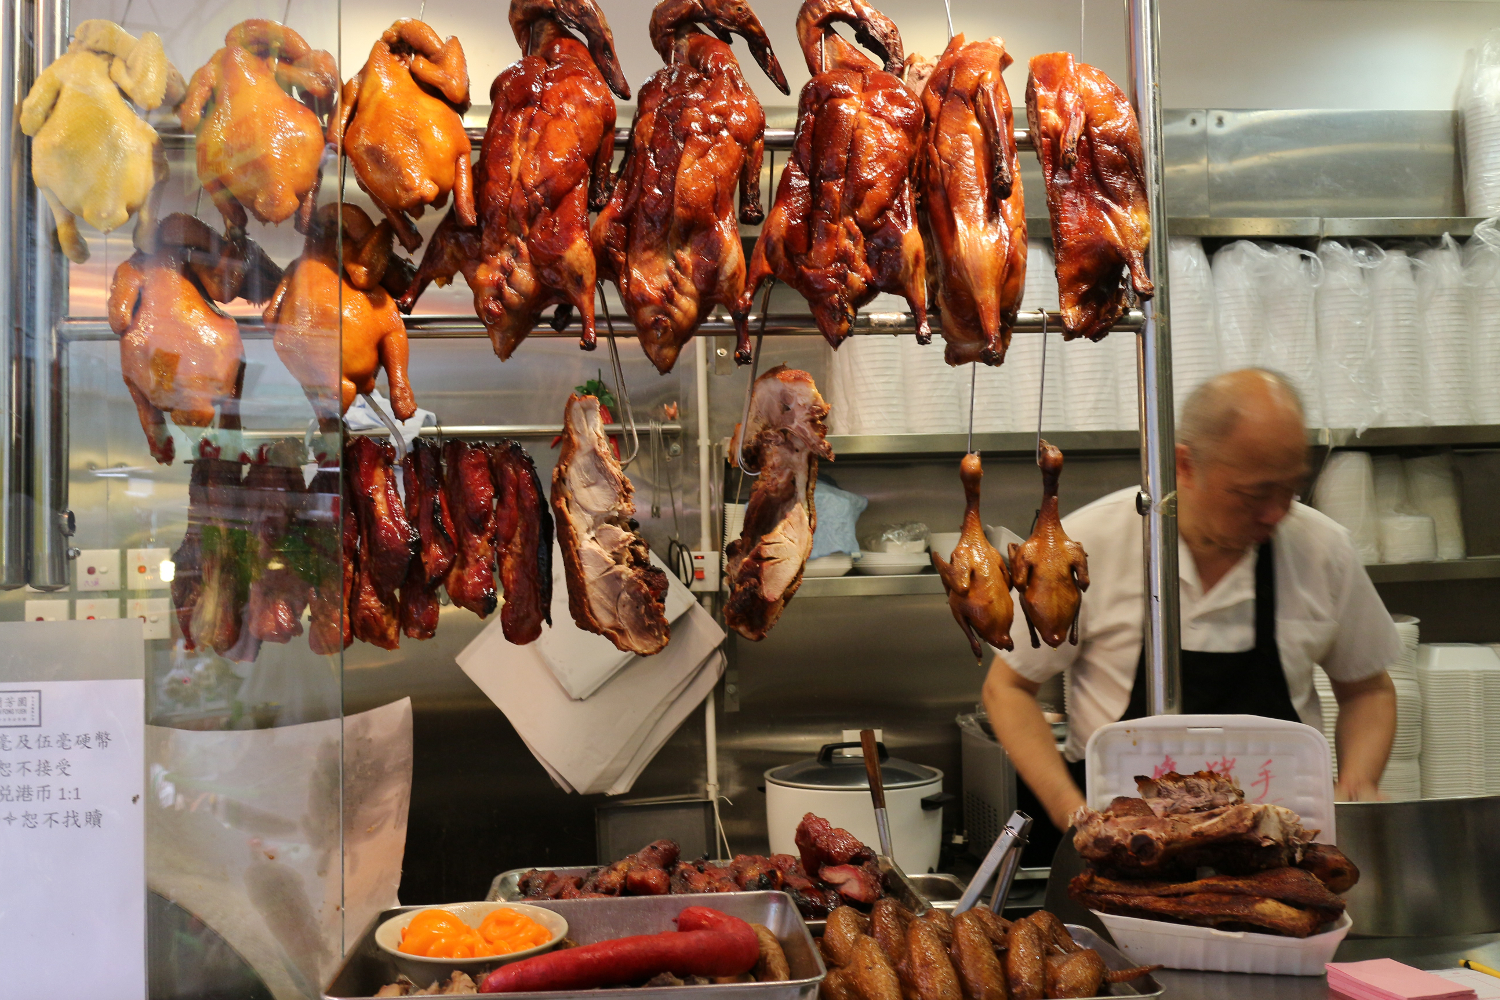 Not just window-dressing: Hong Kong-style barbecue beckons. Image by Piera Chen / londoninfopage